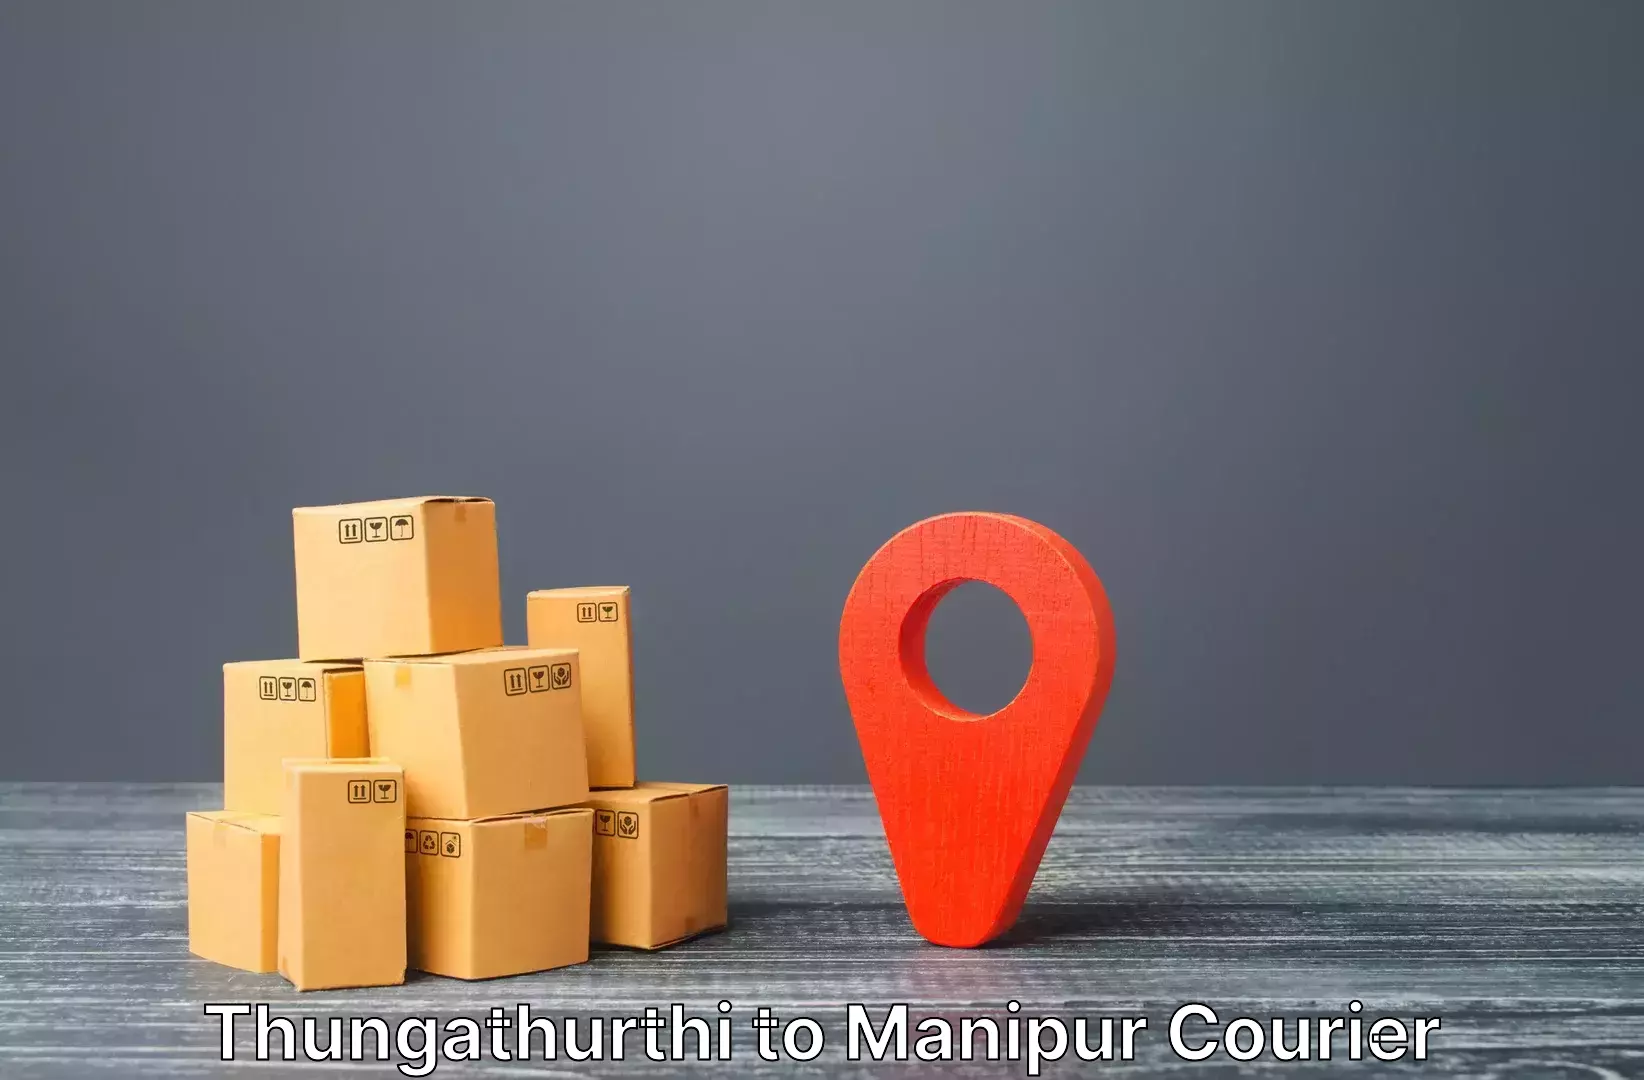 Reliable luggage courier Thungathurthi to Manipur